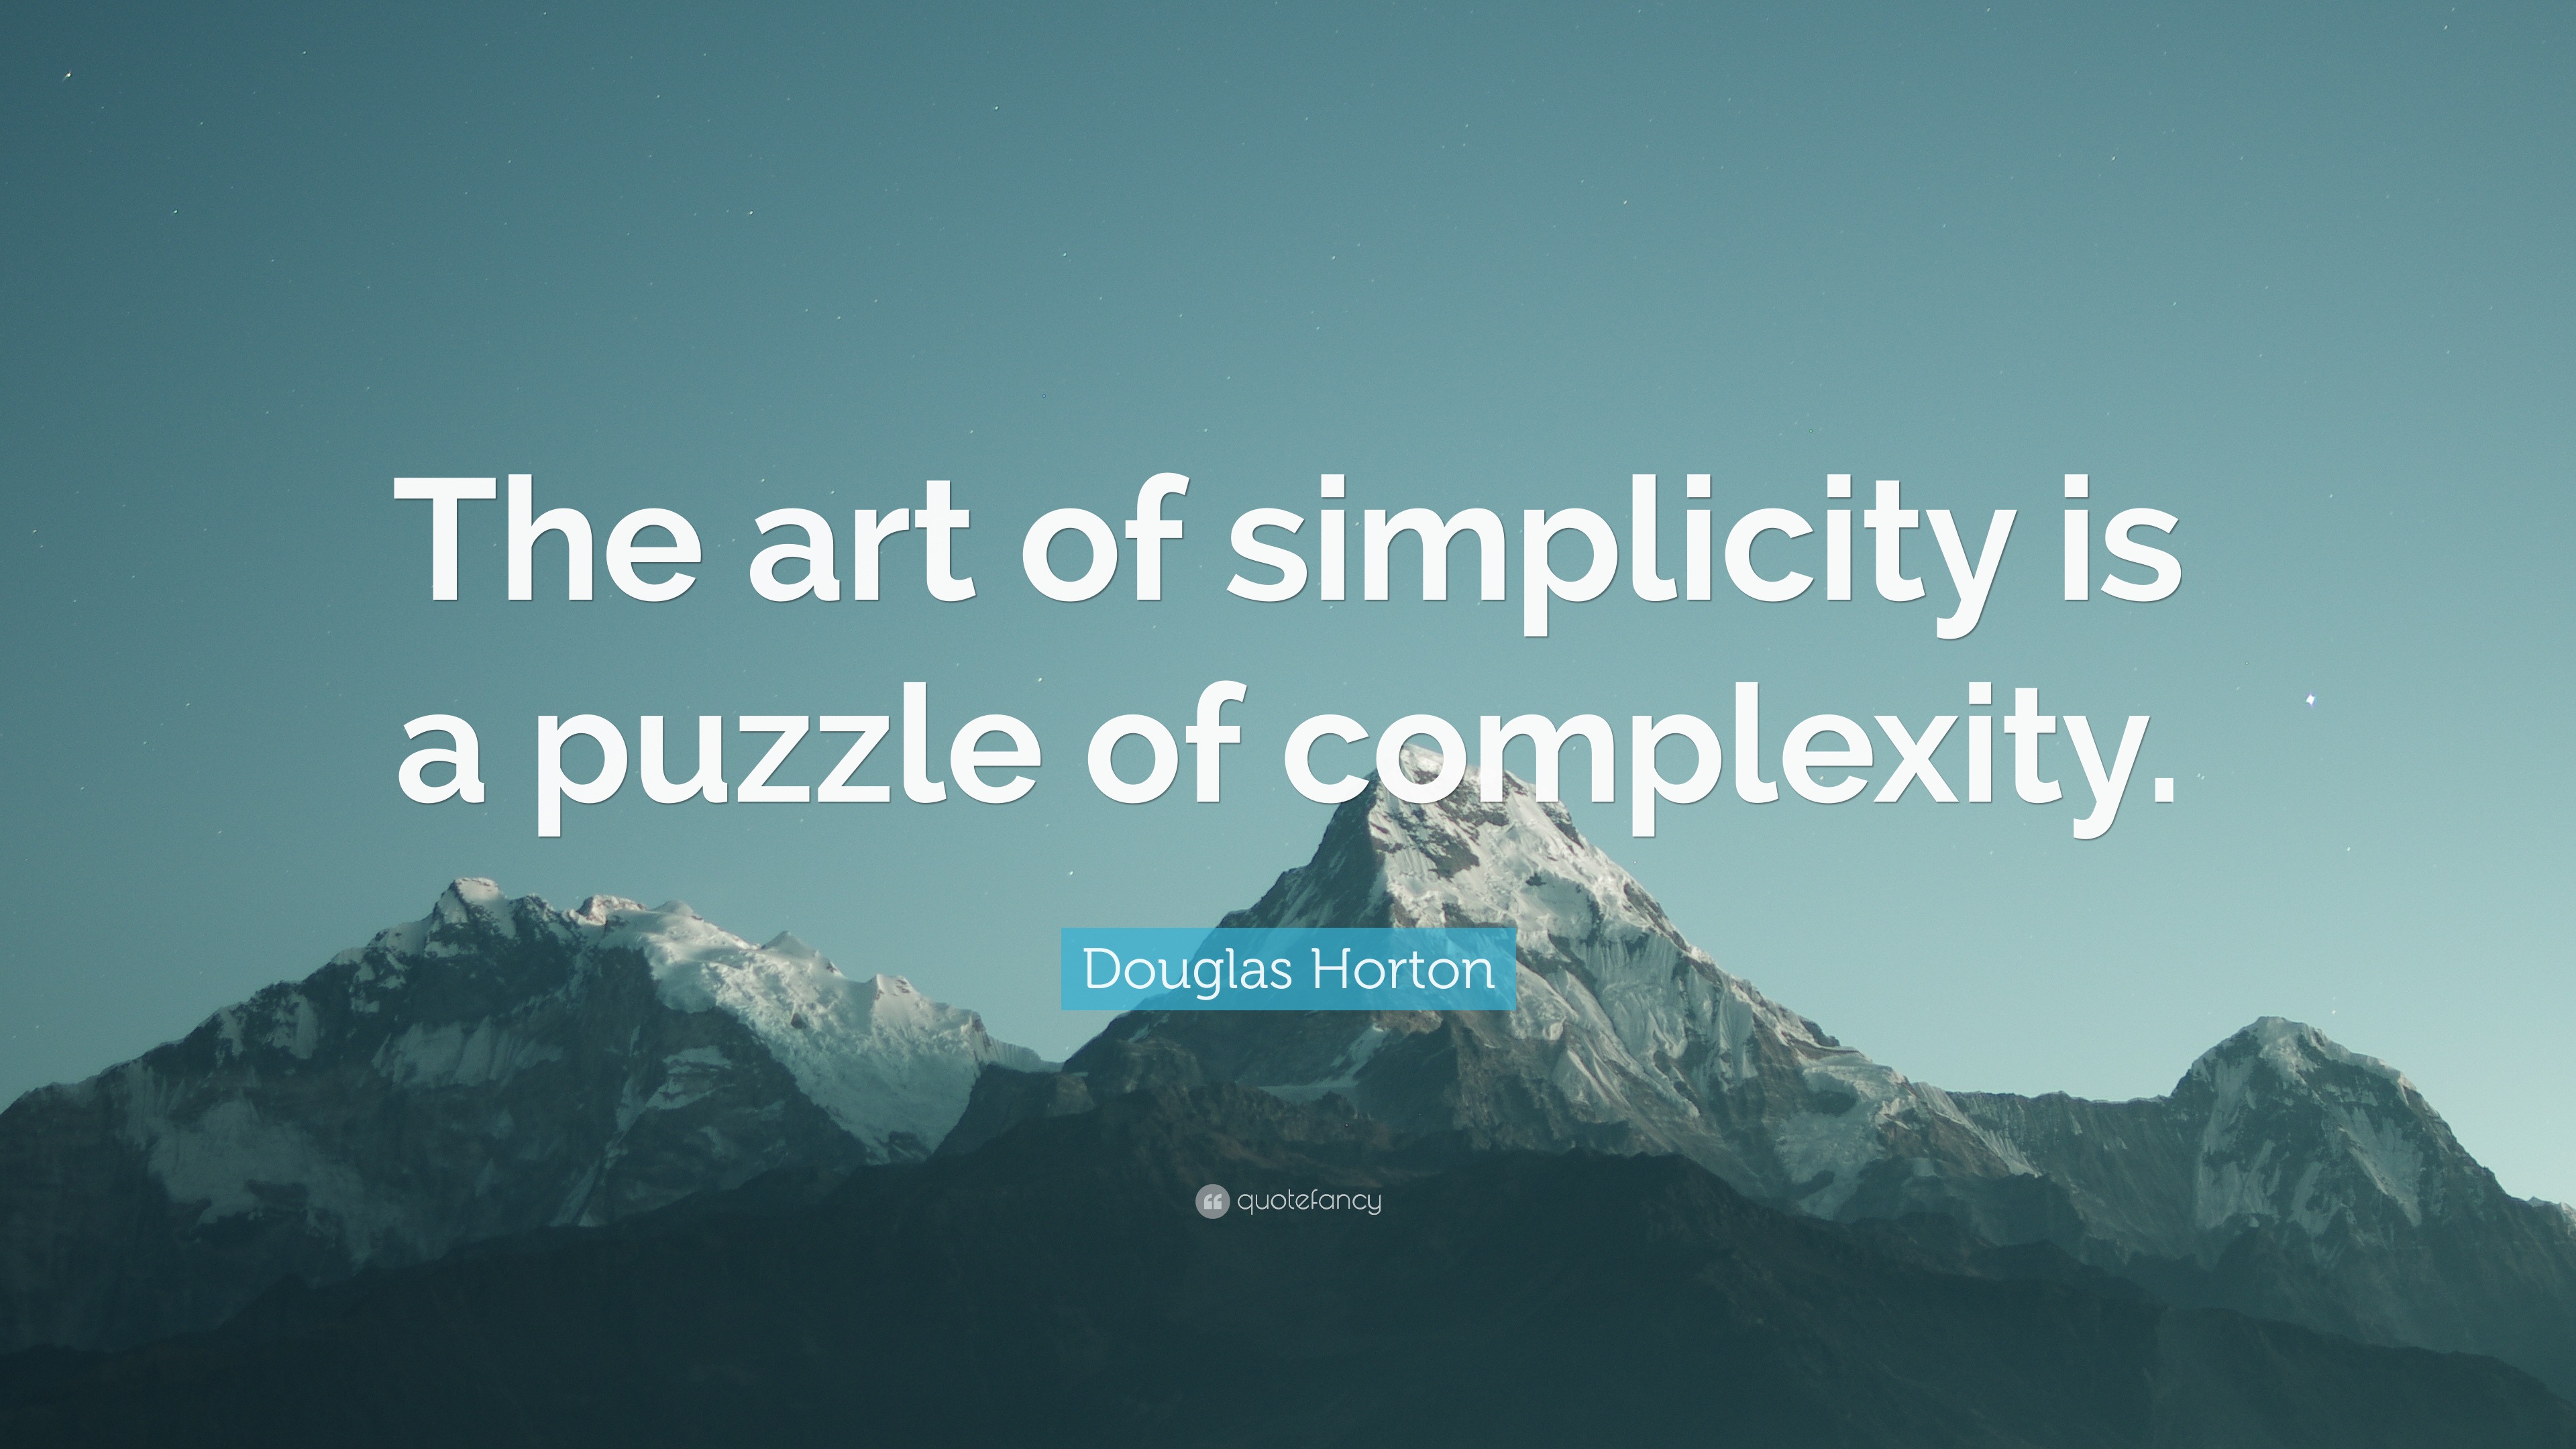 Douglas Horton - The art of simplicity is a puzzle of